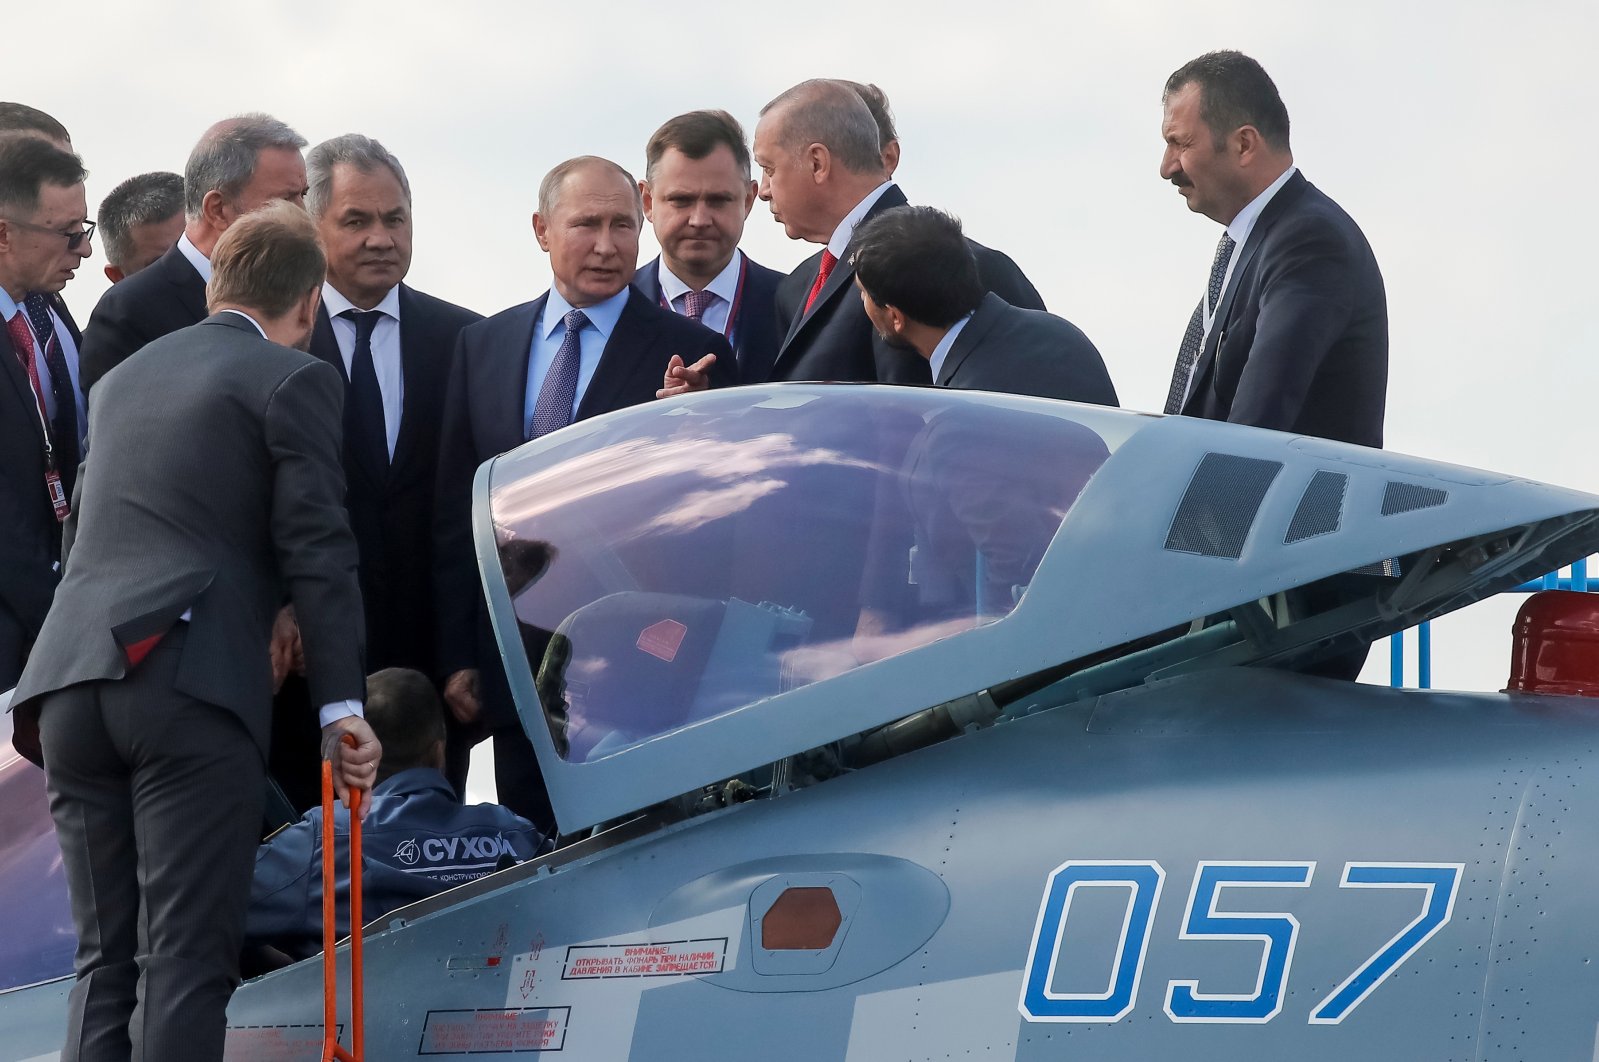 Russian President Vladimir Putin and President Recep Tayyip Erdoğan talk next to a Sukhoi Su-57 fighter jet as they visit the MAKS 2019 air show in Zhukovsky, outside Moscow, Russia, Aug. 27, 2019. (Reuters Photo)